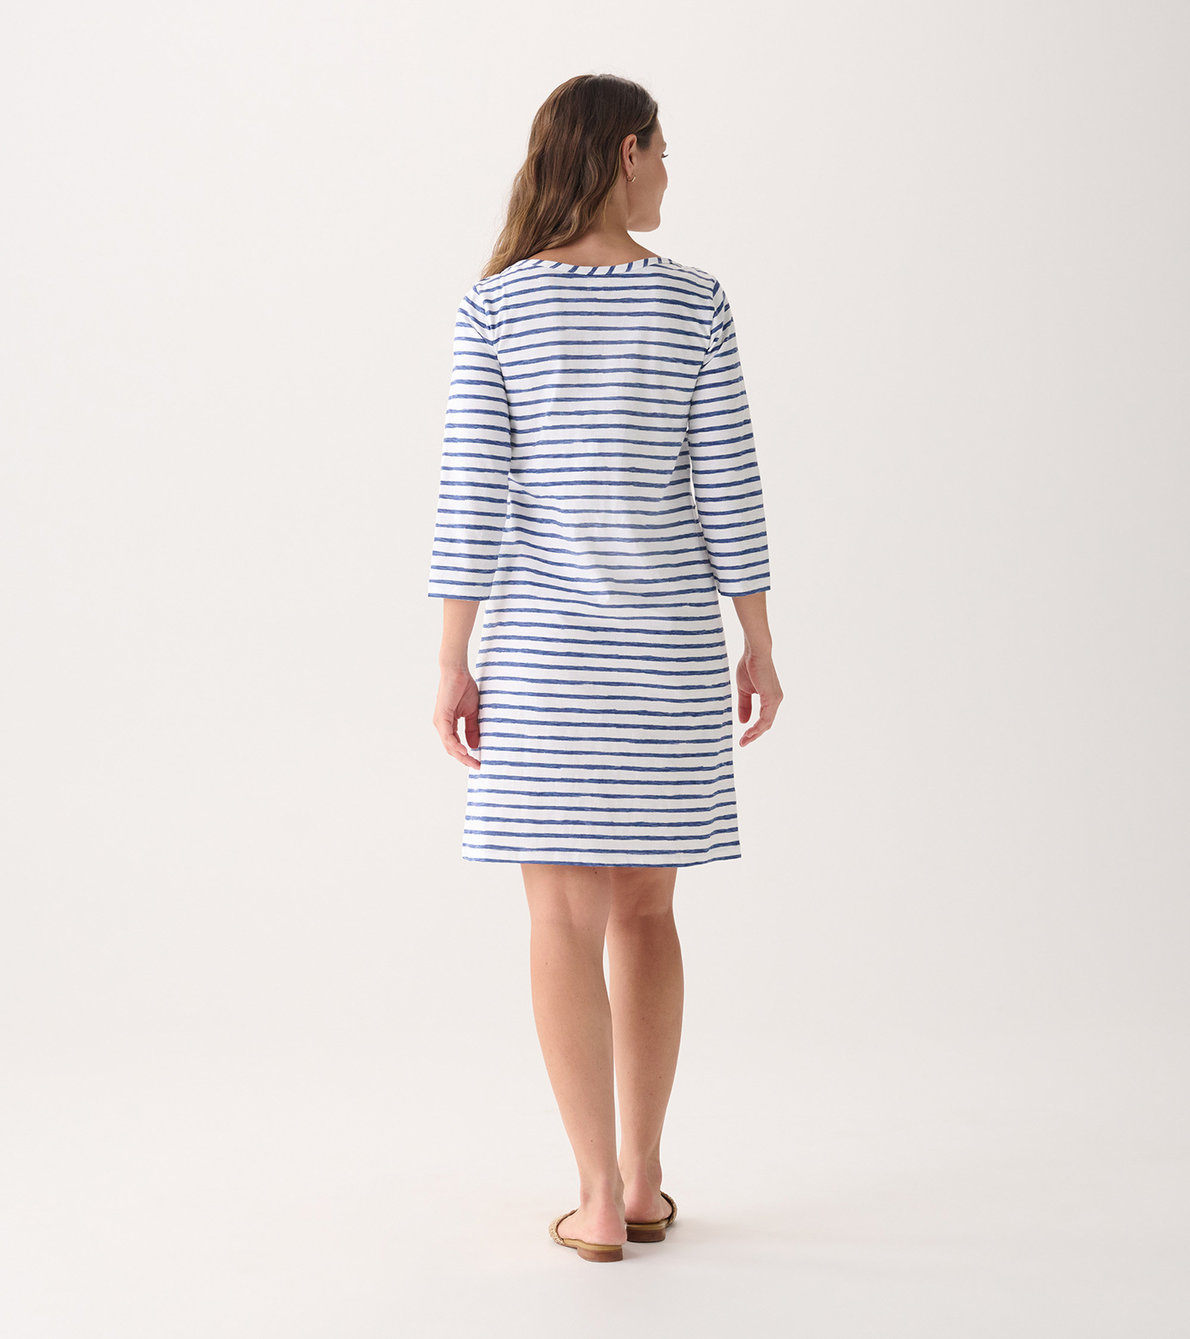 View larger image of Women's Watercolor Stripes 3/4 Sleeve Summer Dress